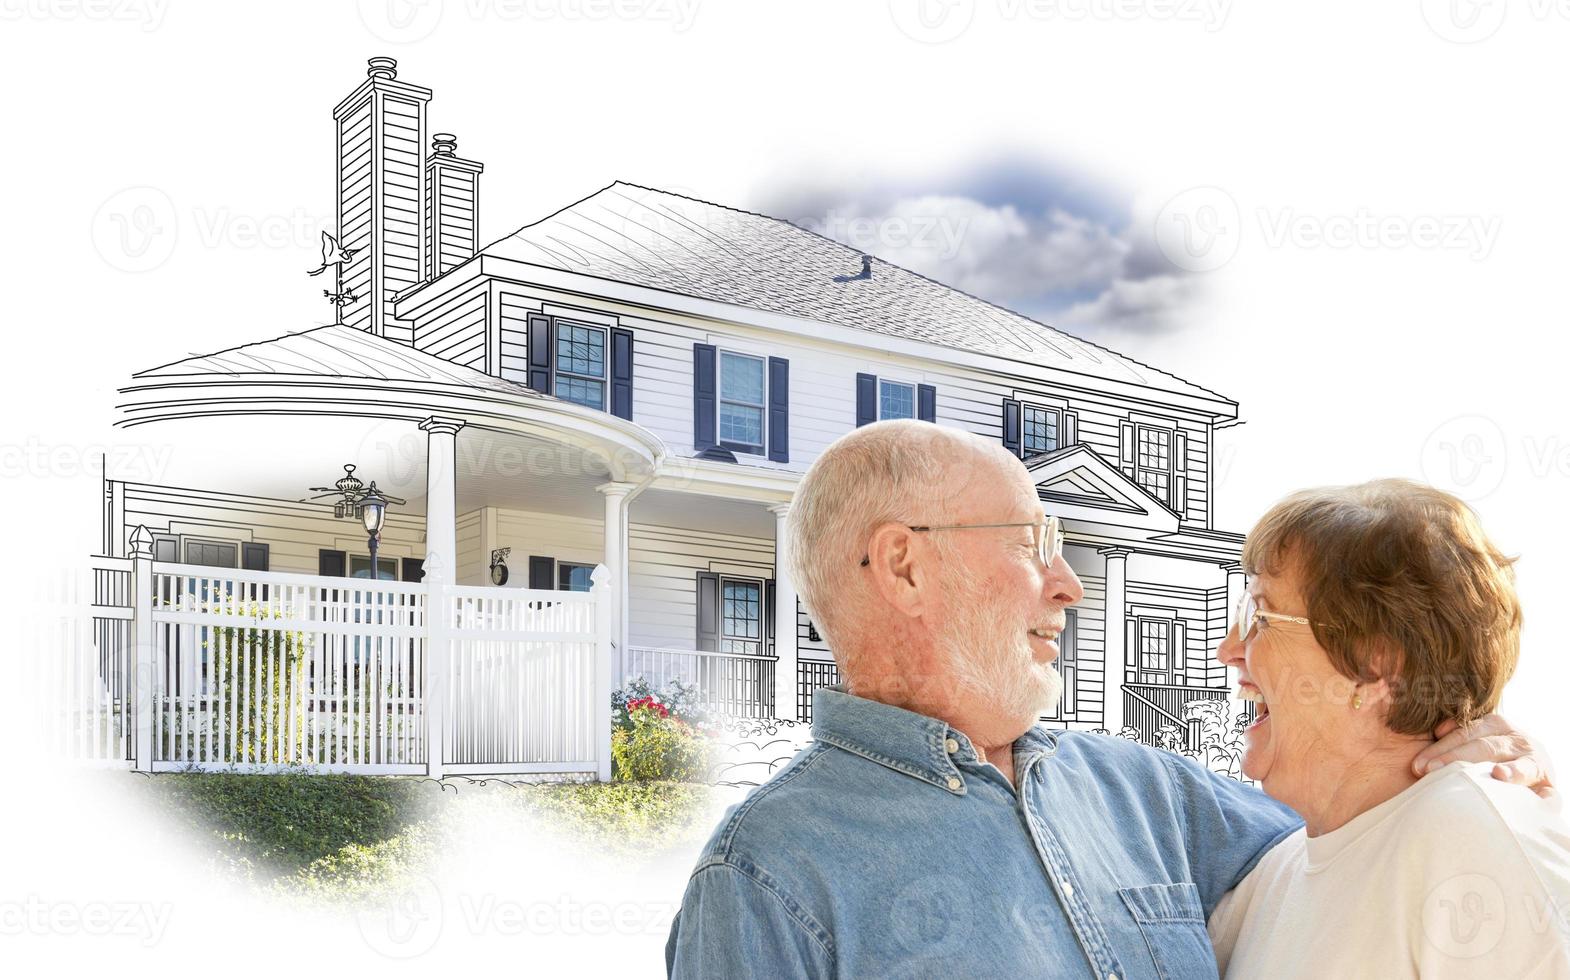 Happy Senior Couple Over House Drawing and Photo on White